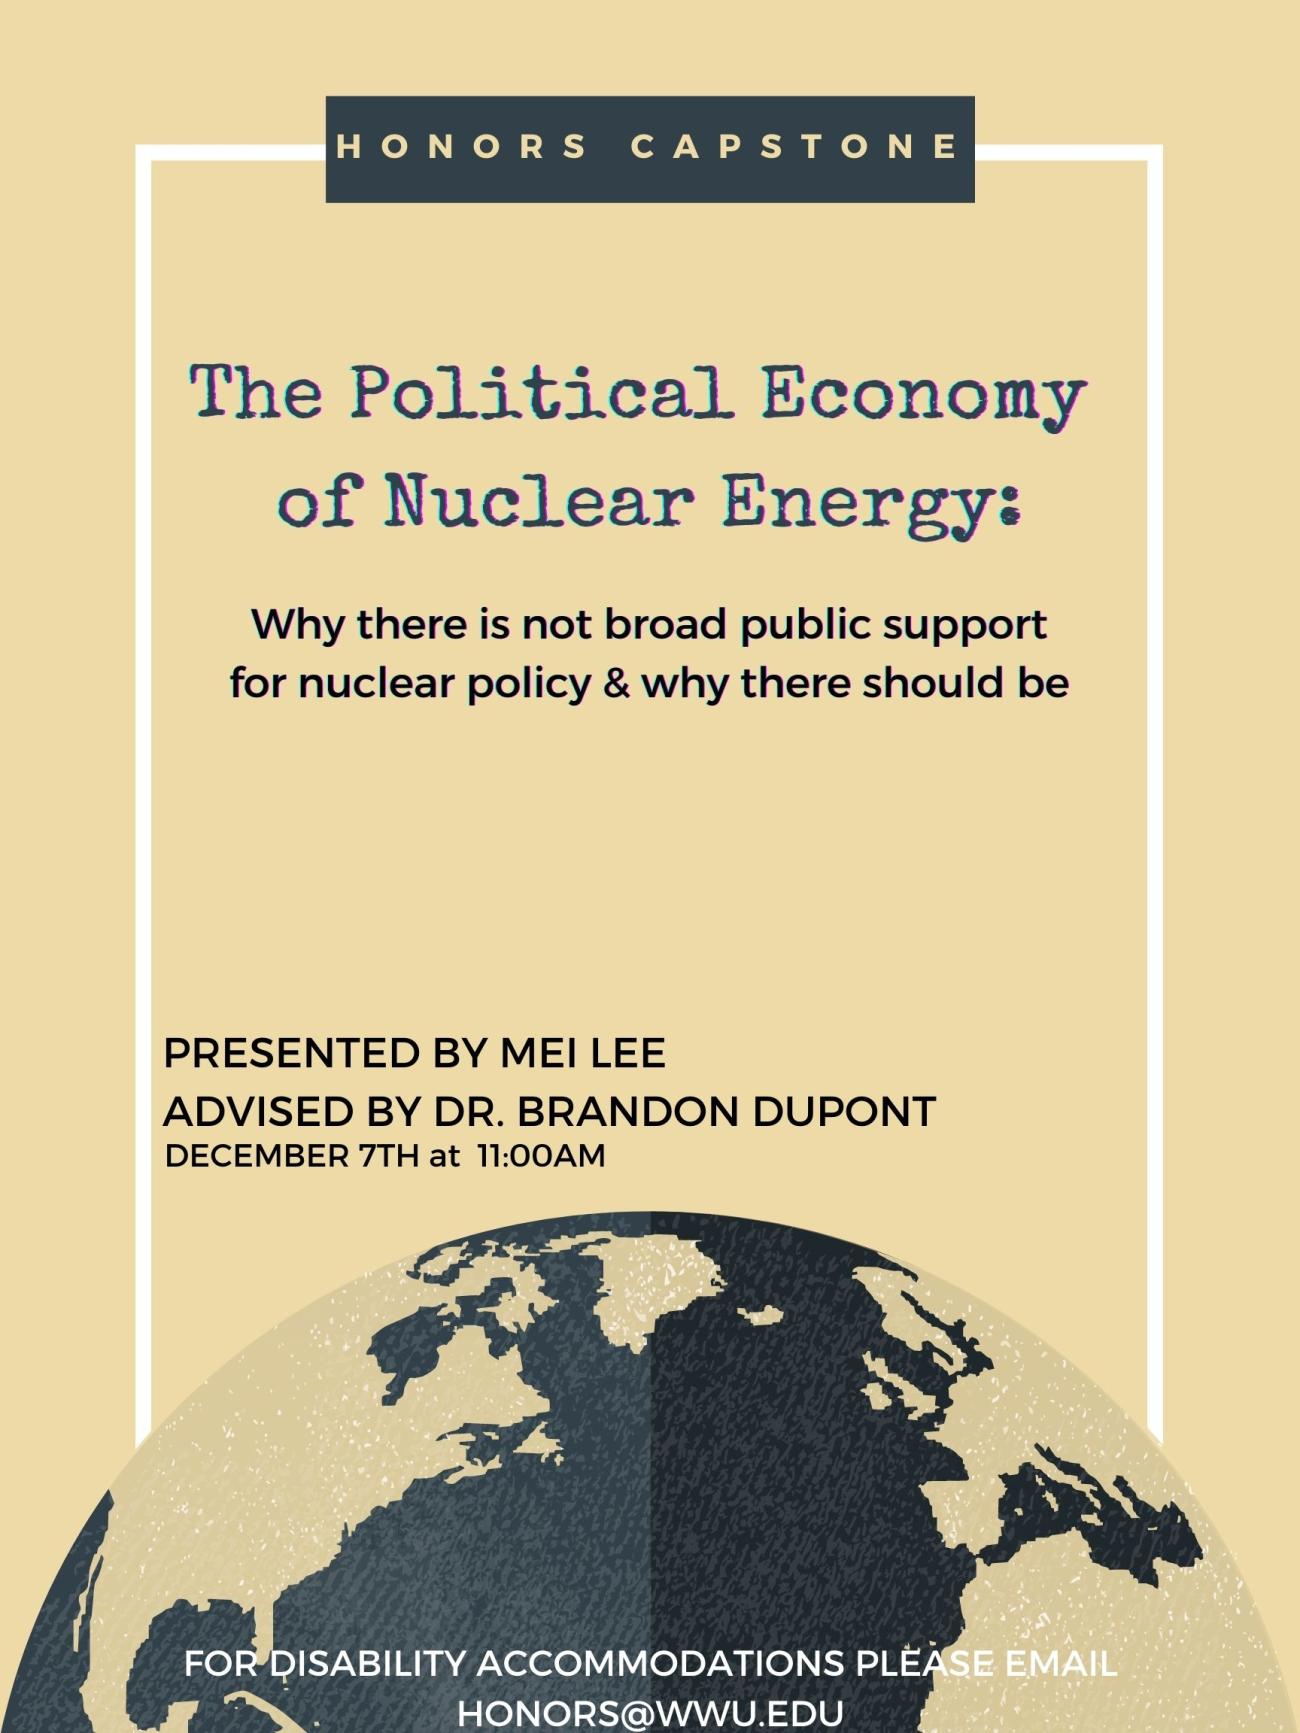 Image of greyed out planet Earth on tan background. Text: "Honors Capstone. The Political Economy of Nuclear Energy: Why there is not broad public support for nuclear policy & why there should be. Presented by Mei Lee. Advised by Dr. Brandon Dupont. Presentation will be held on December 7th at 11 am. For disability accommodations, please email: honors@wwu.edu"